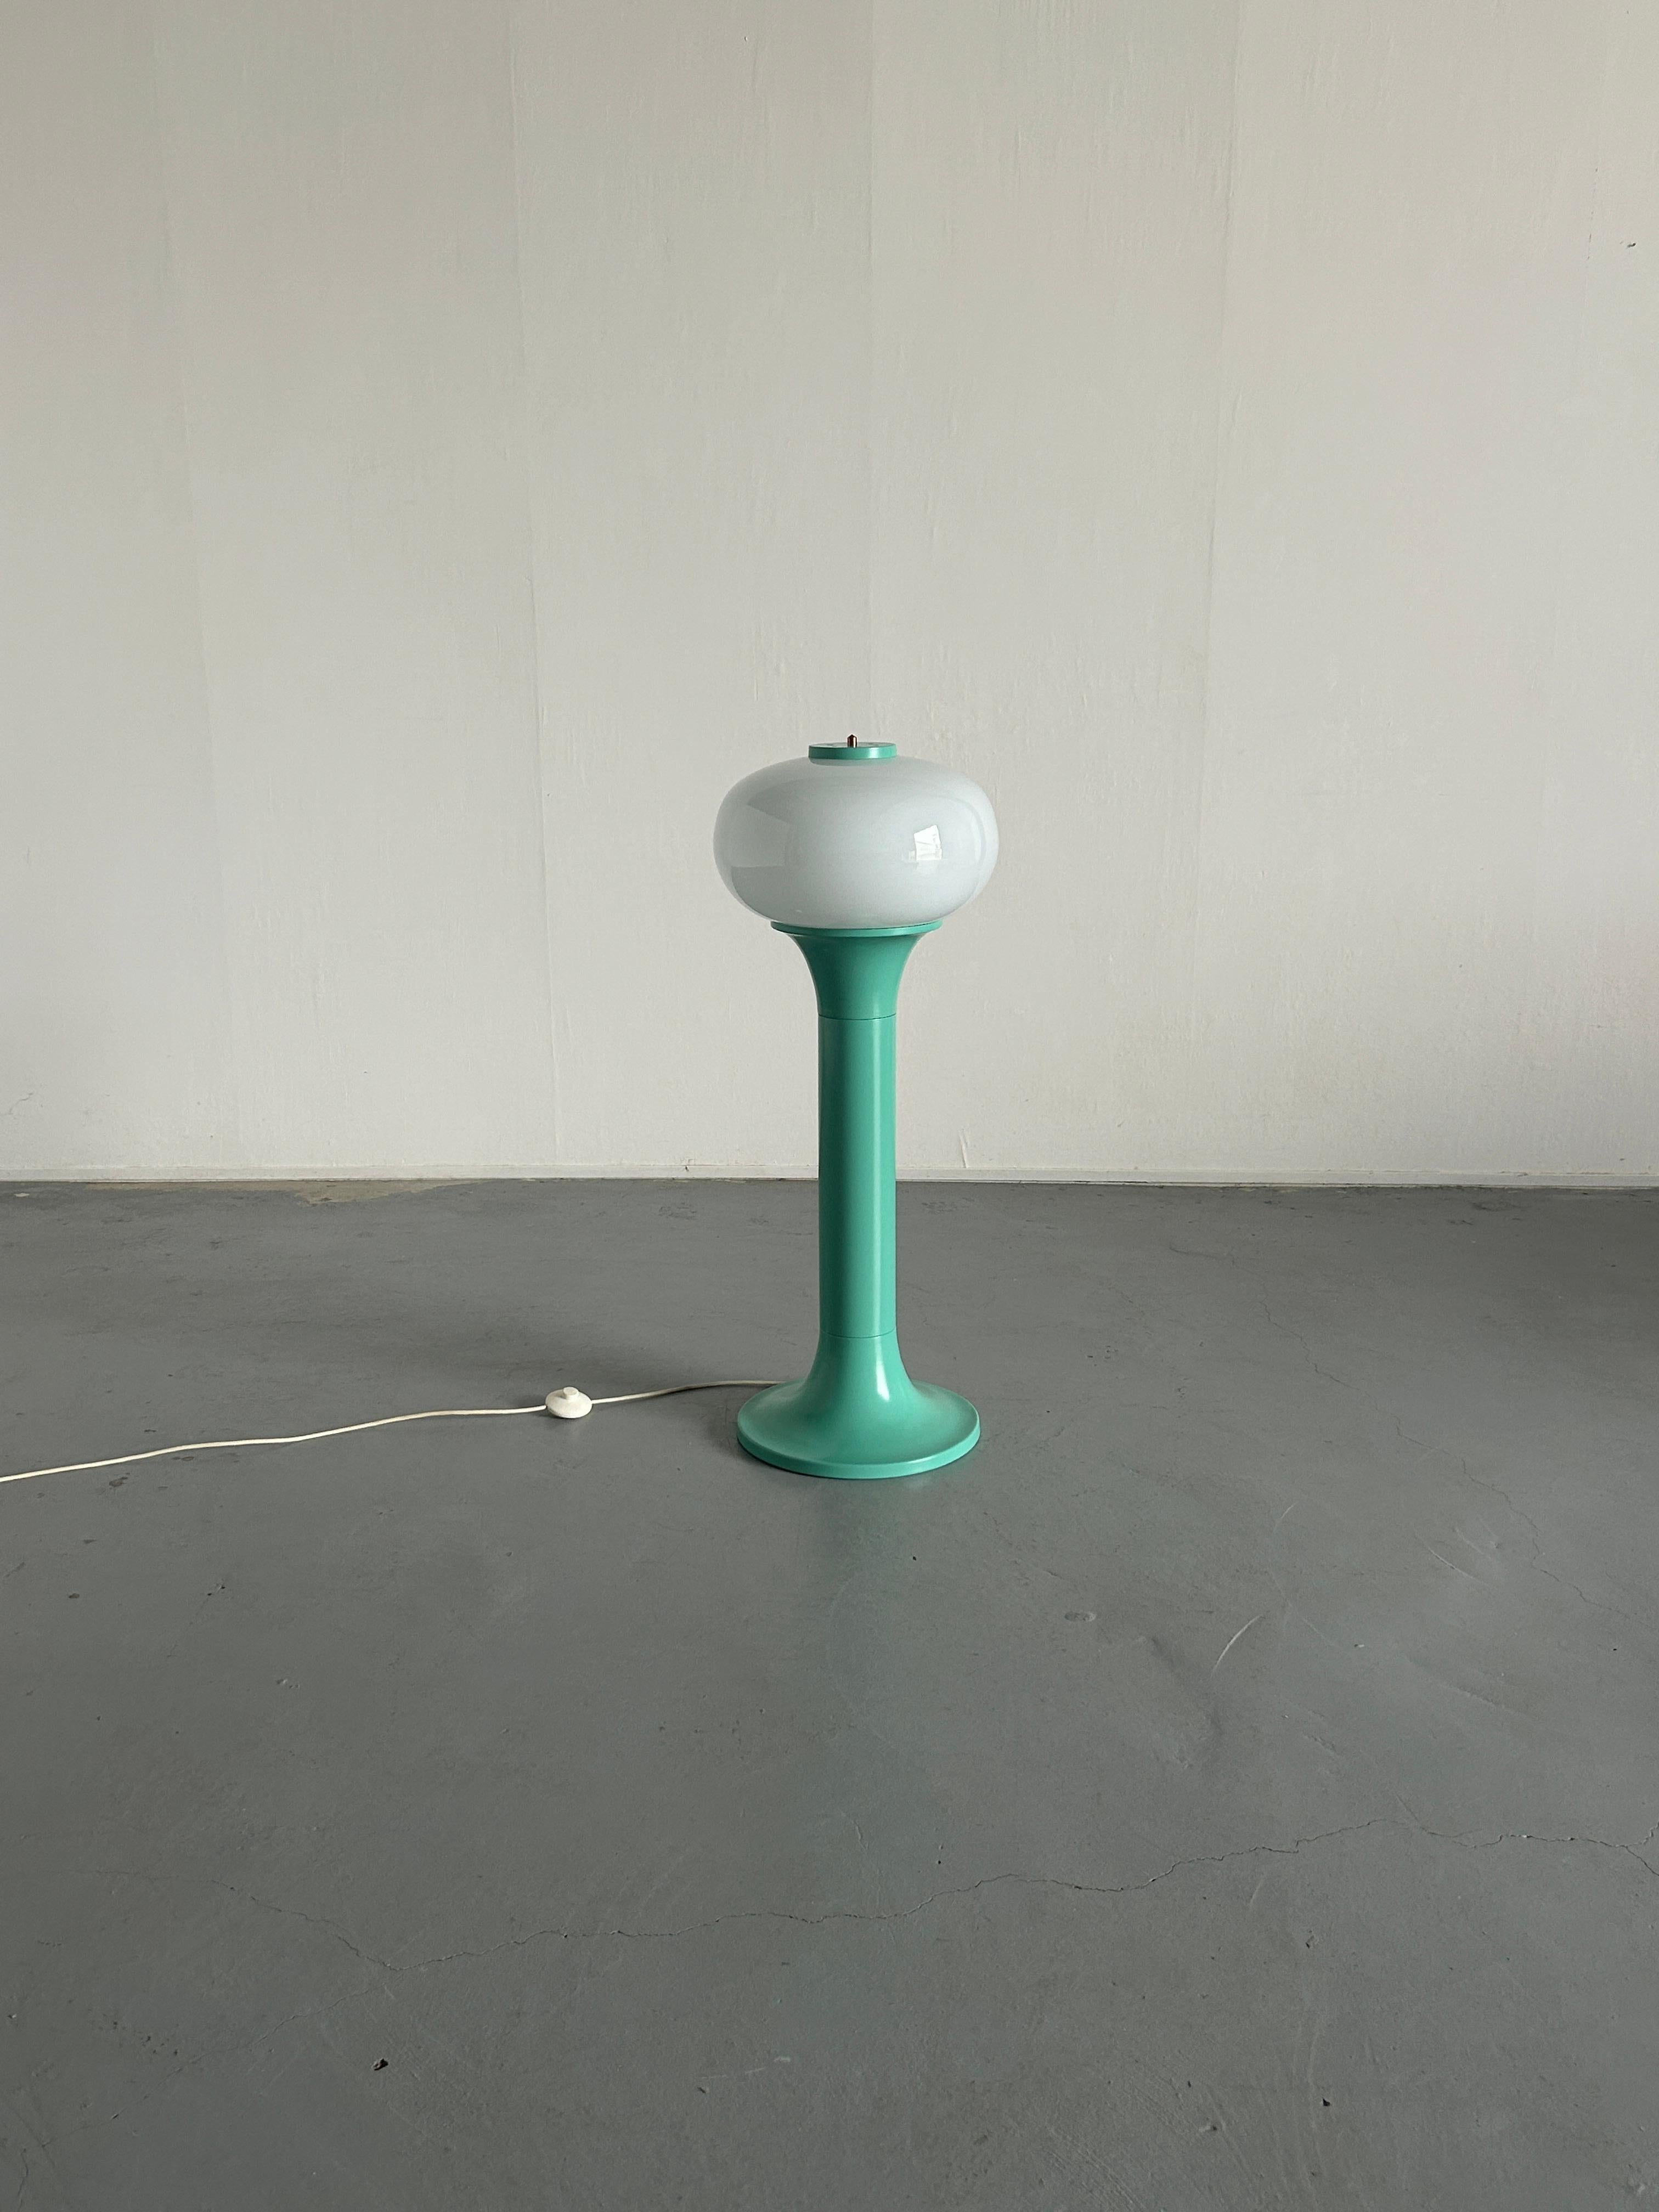 A beautiful light metal and glass Mid-century modern floor lamp. 
Produced by 'Dekor Zagreb' during the 1970s.

Tall and monumental, resembling an outdoor light fixture.
Pop art or space age style.

Fully restored in mint green colour with matt